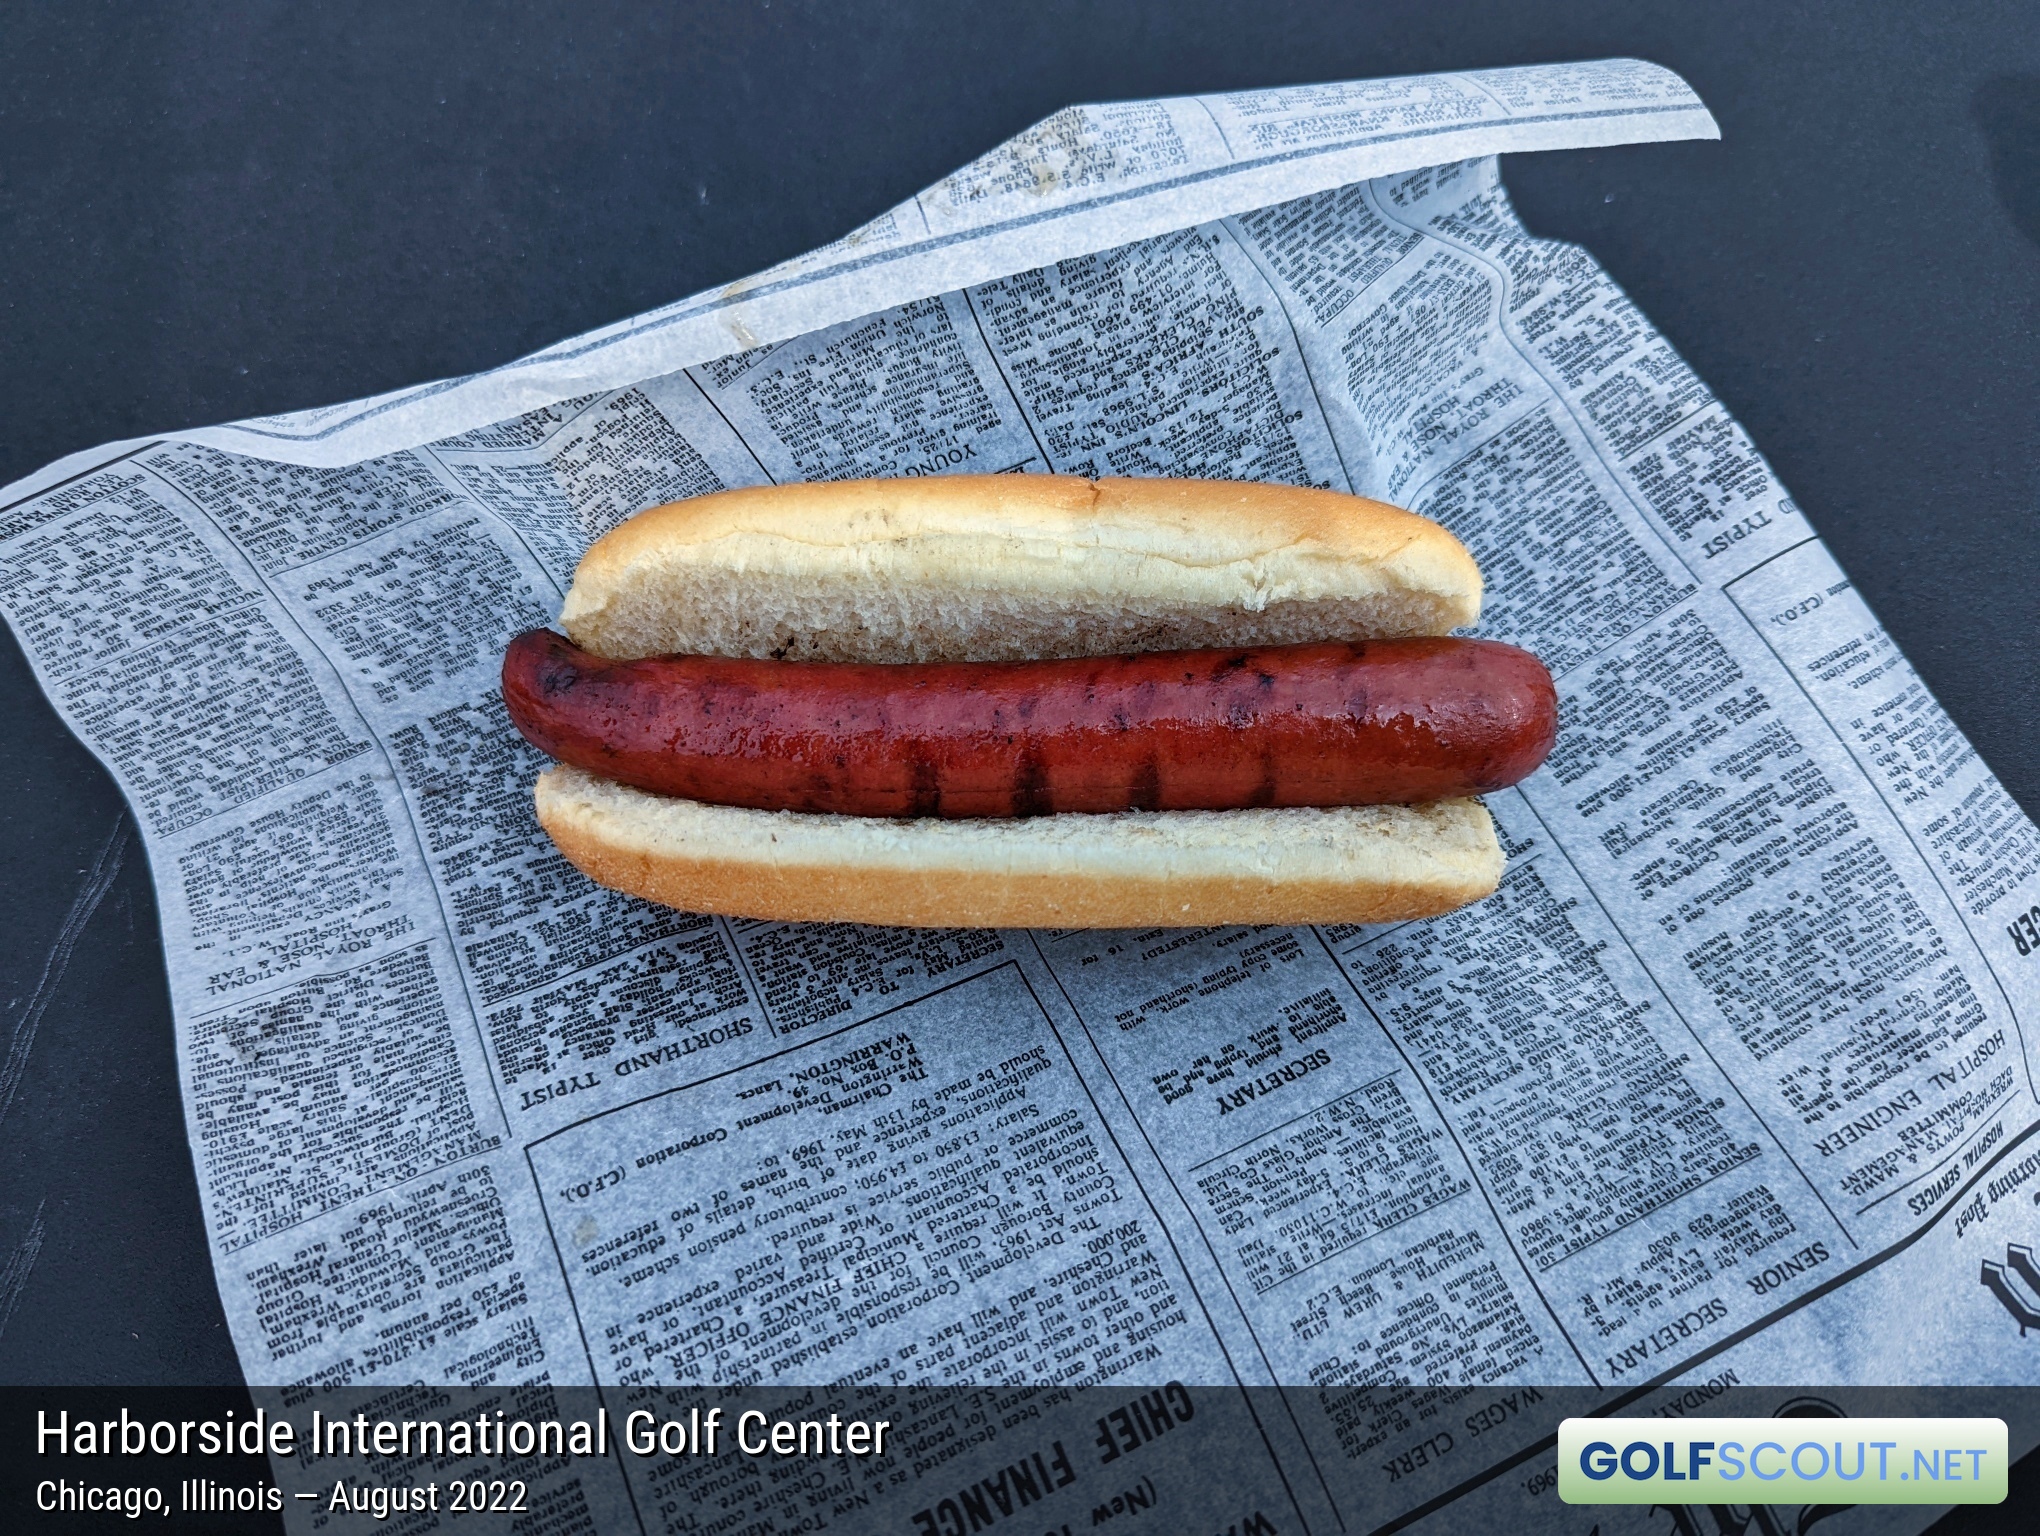 Photo of the food and dining at Harborside International Golf Center in Chicago, Illinois. Photo of the hot dog at Harborside International Golf Center in Chicago, Illinois.